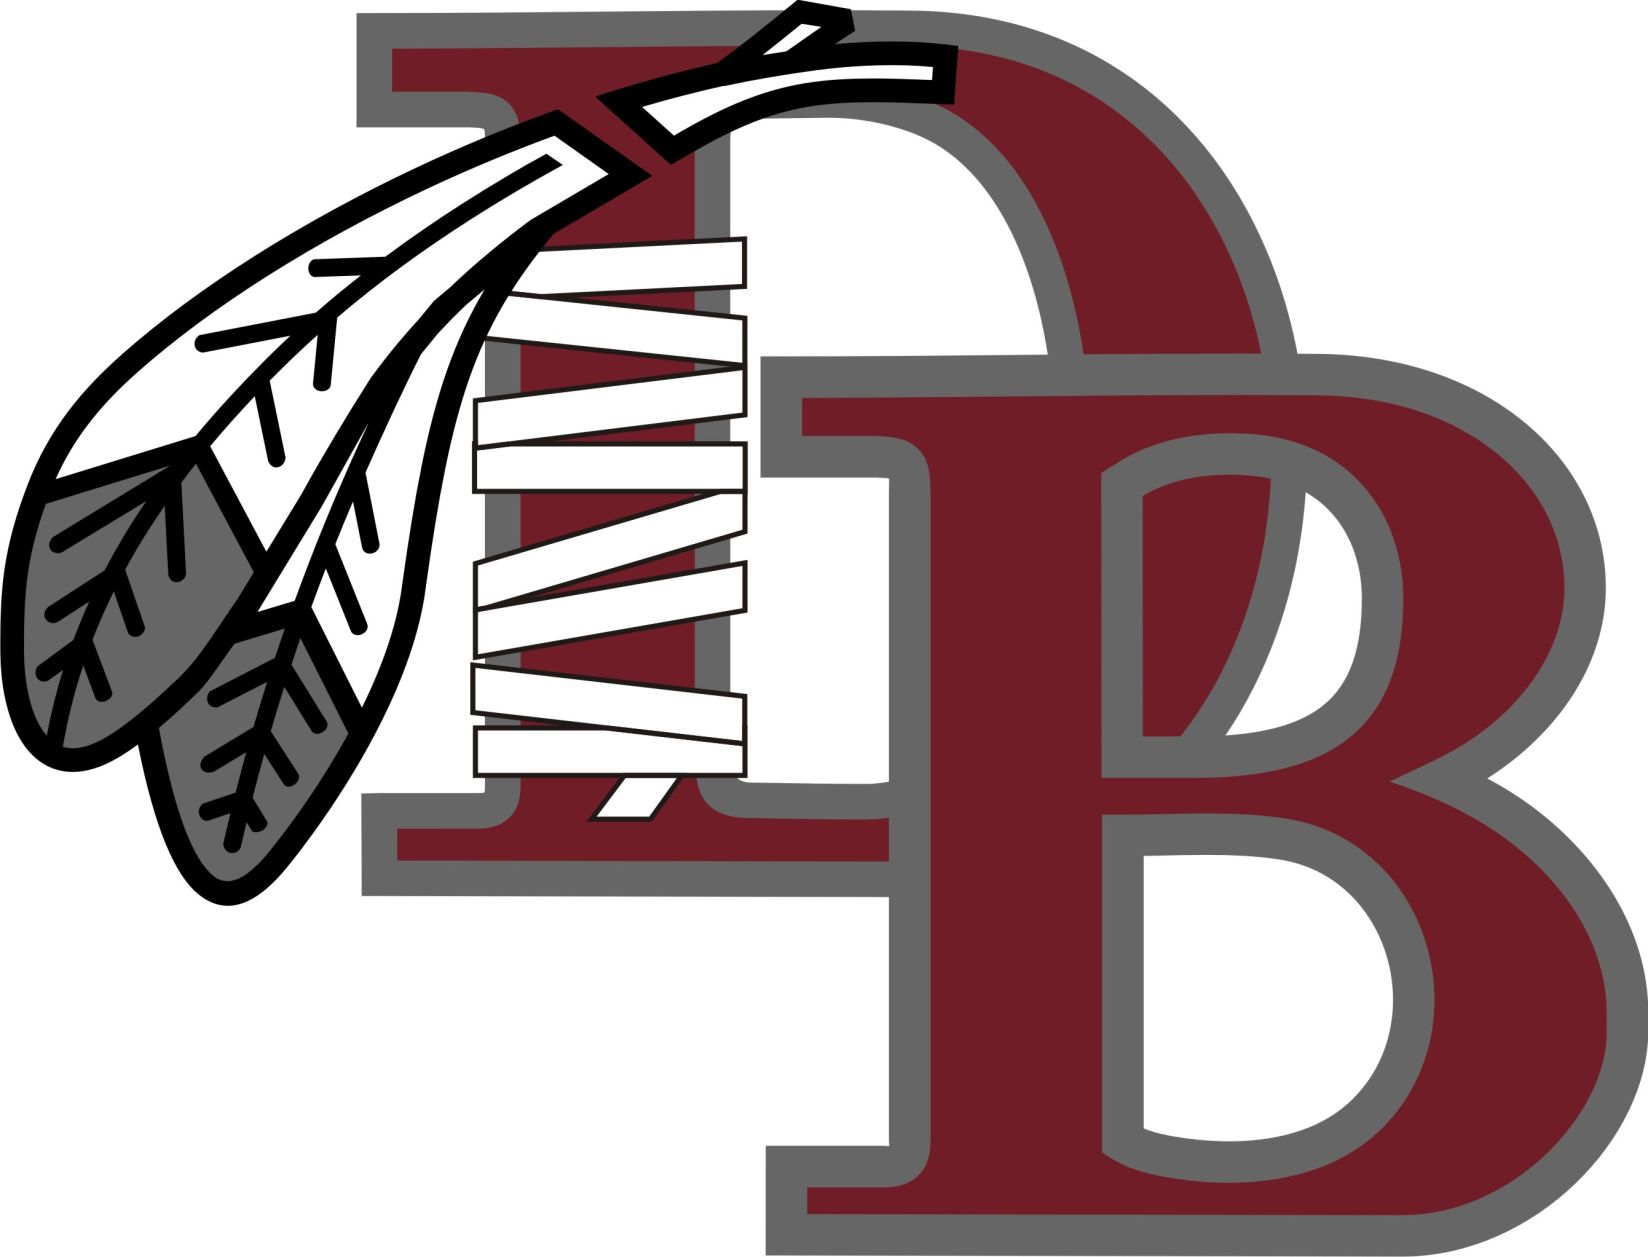 Updated; Brian Tate named permanent Dobyns-Bennett principal Education timesnews